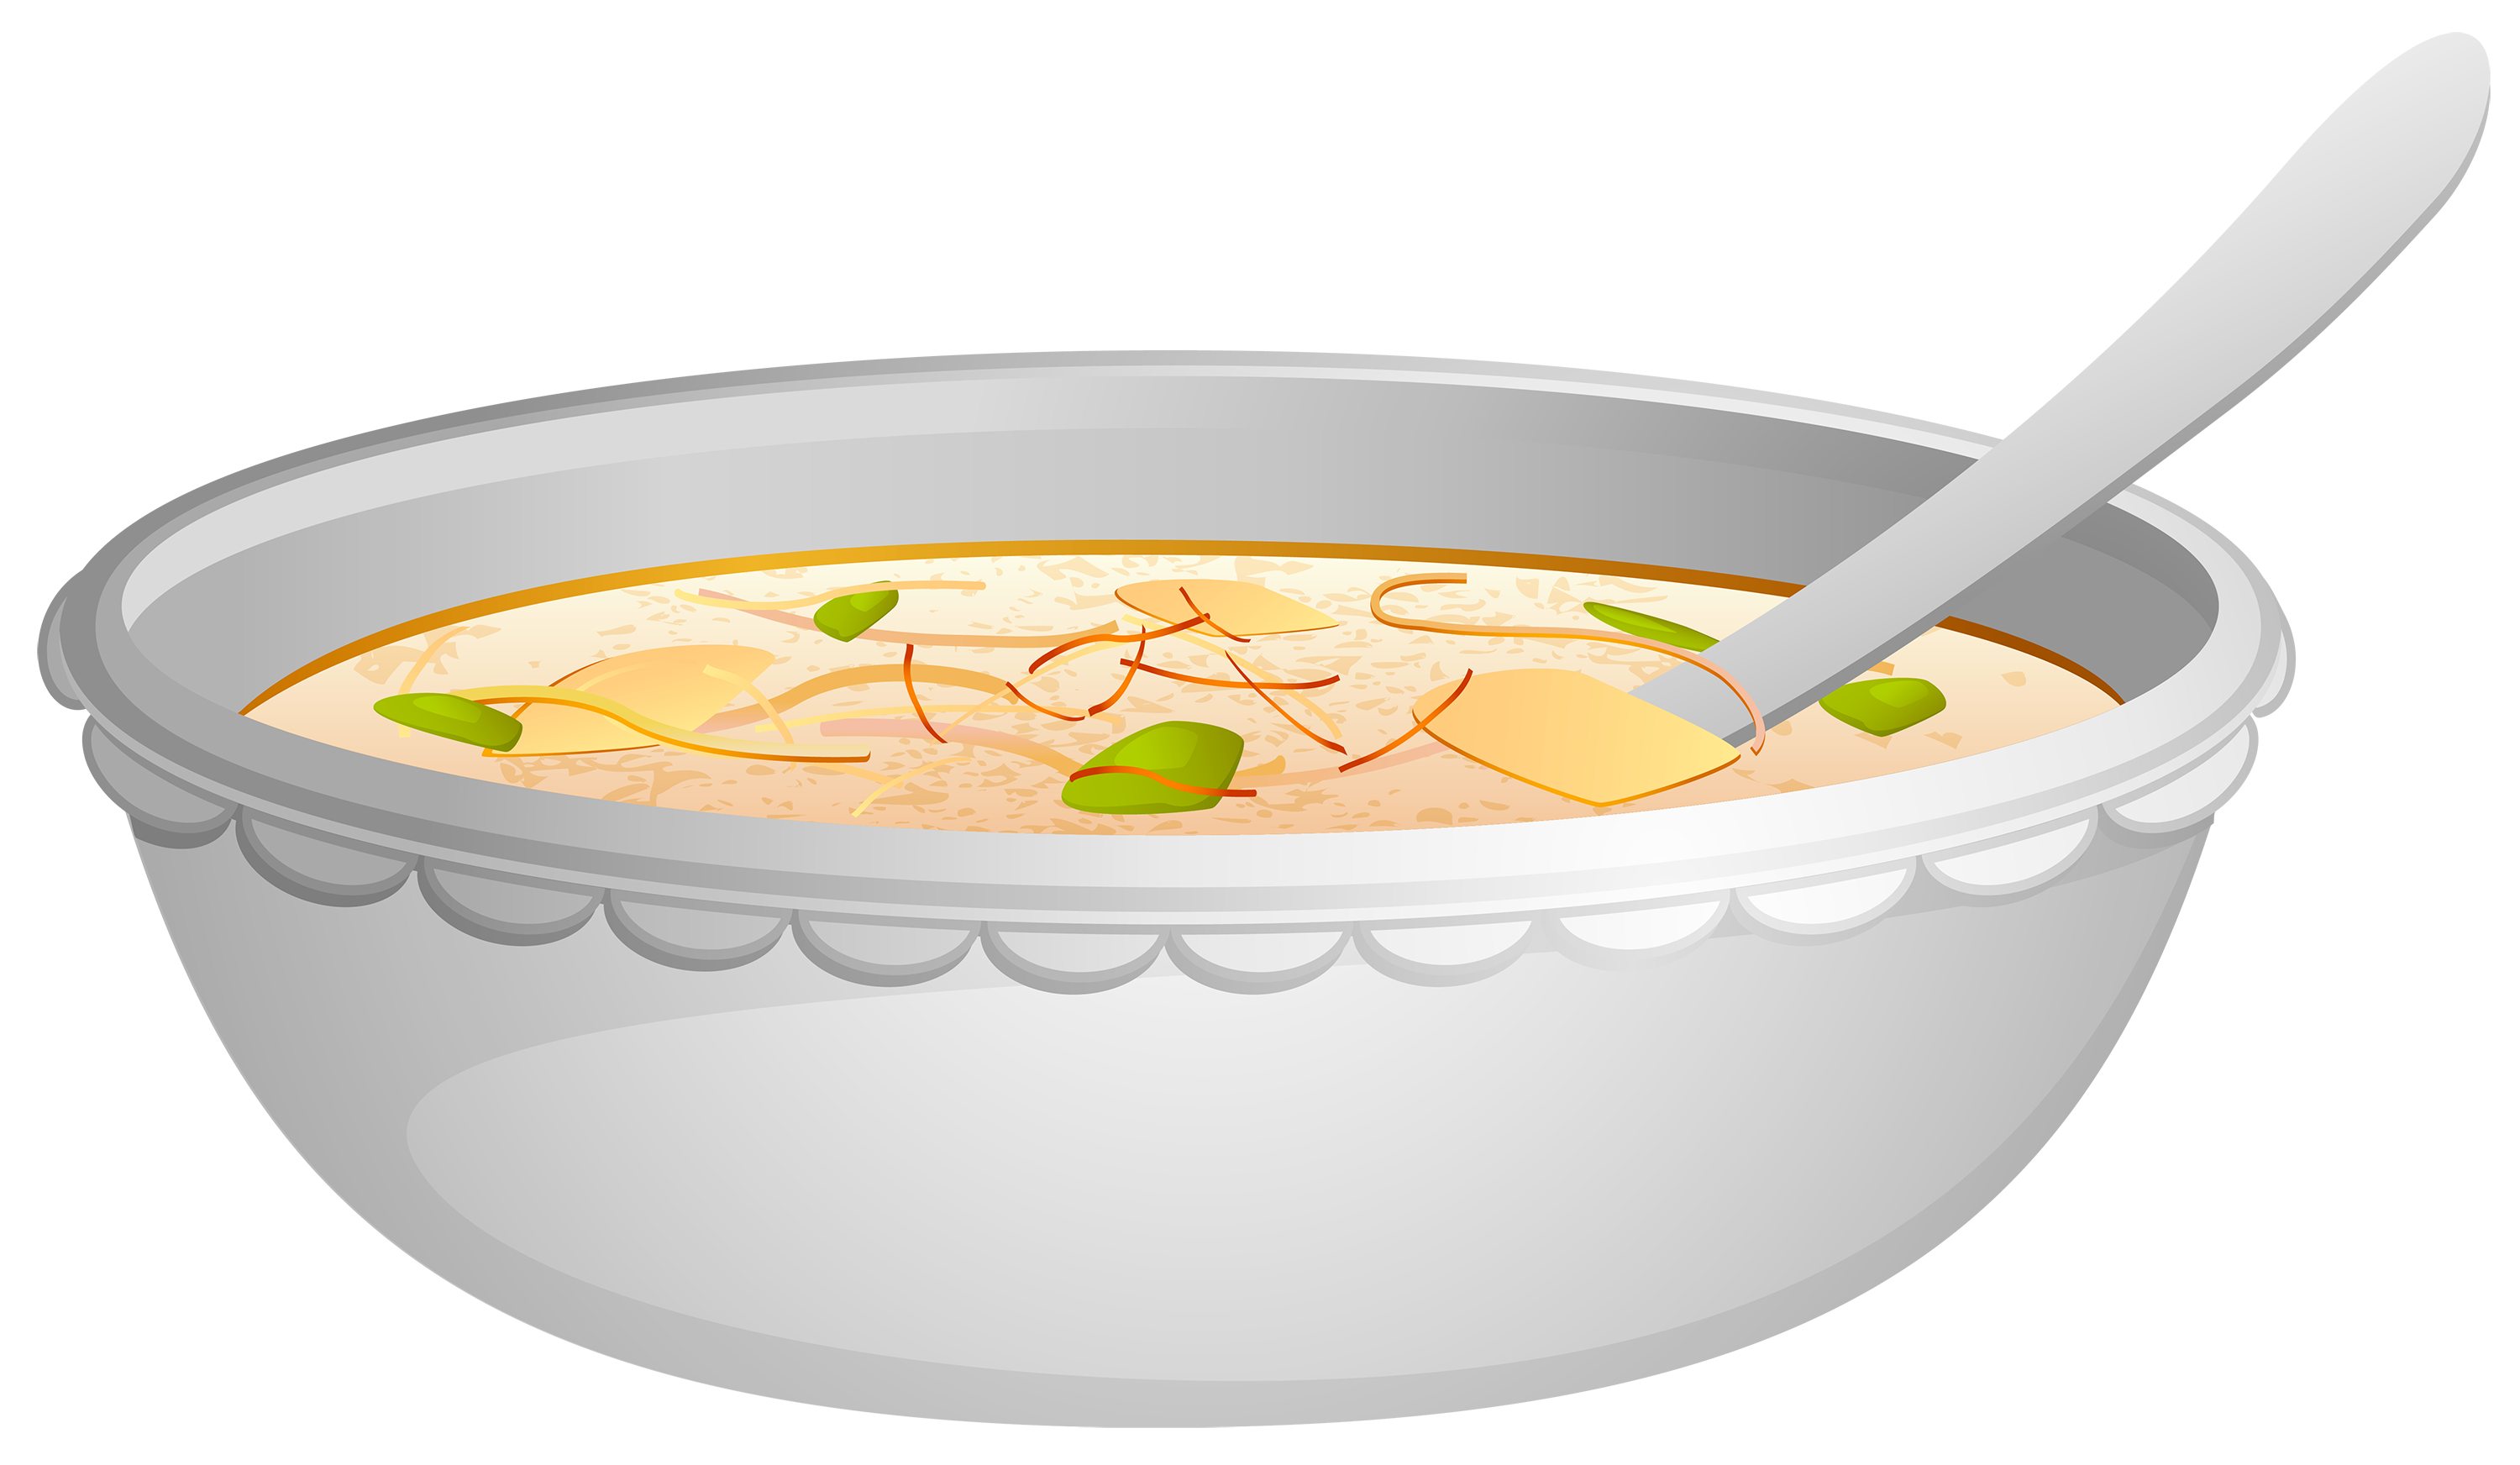 Bowl Of Soup Picture Cliparts